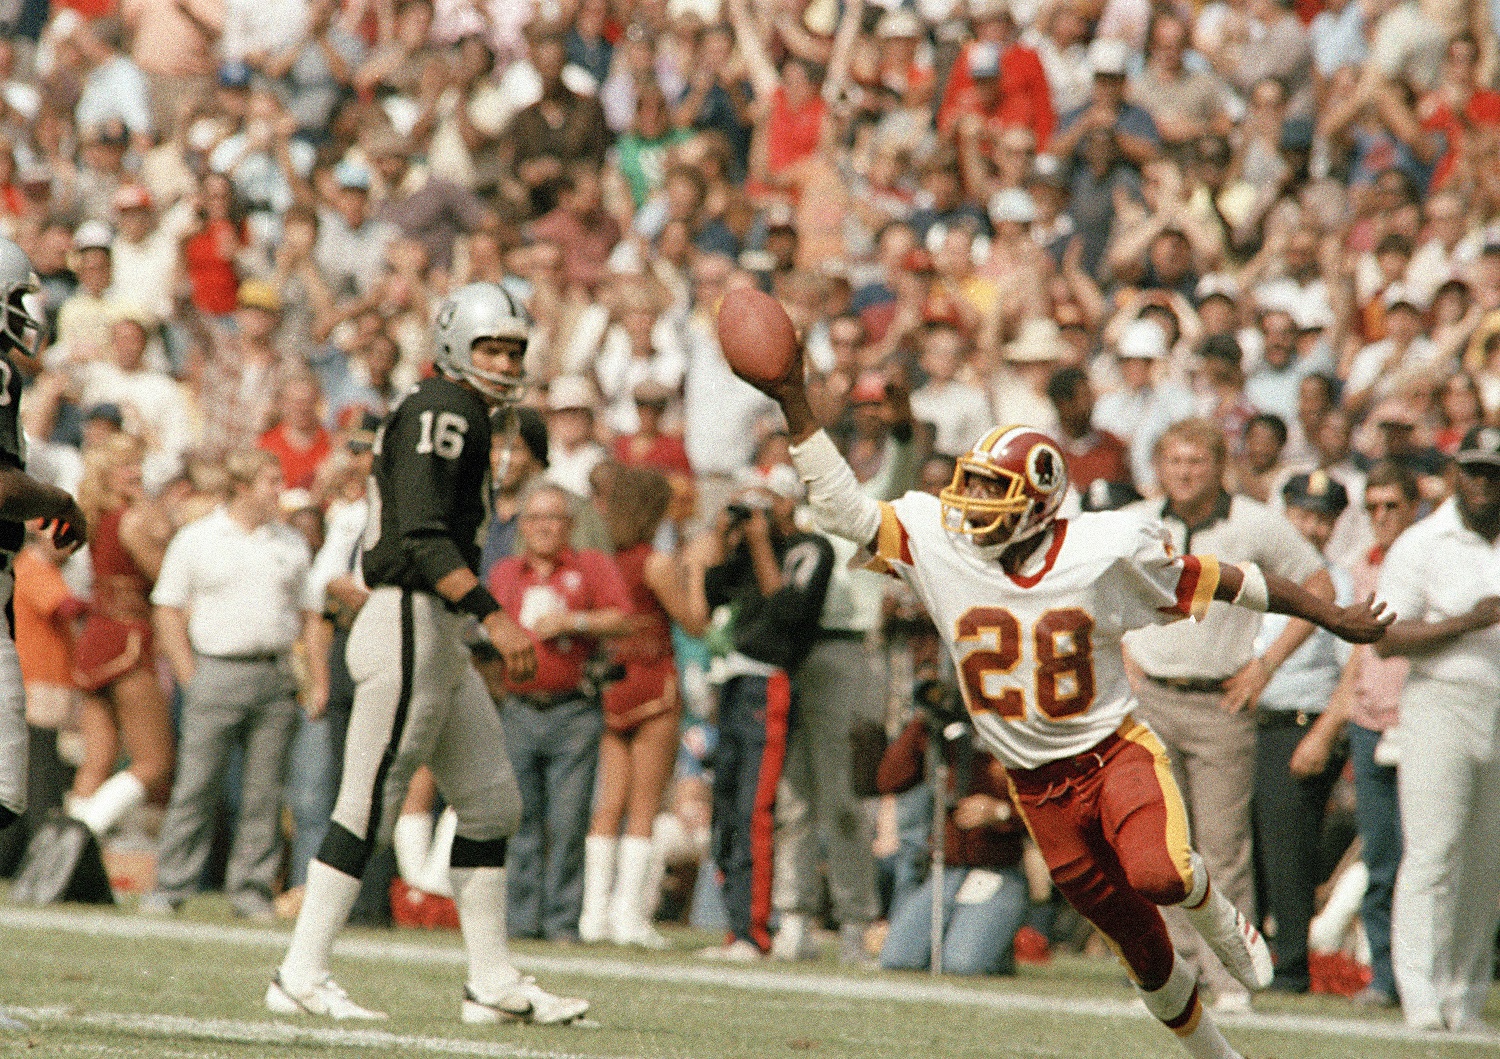 Washington Redskins Darrell Green (28) is shown in action during game against the Los Angeles Raiders in Washington, Oct. 2, 1983. (AP Photo/Pete Wright)